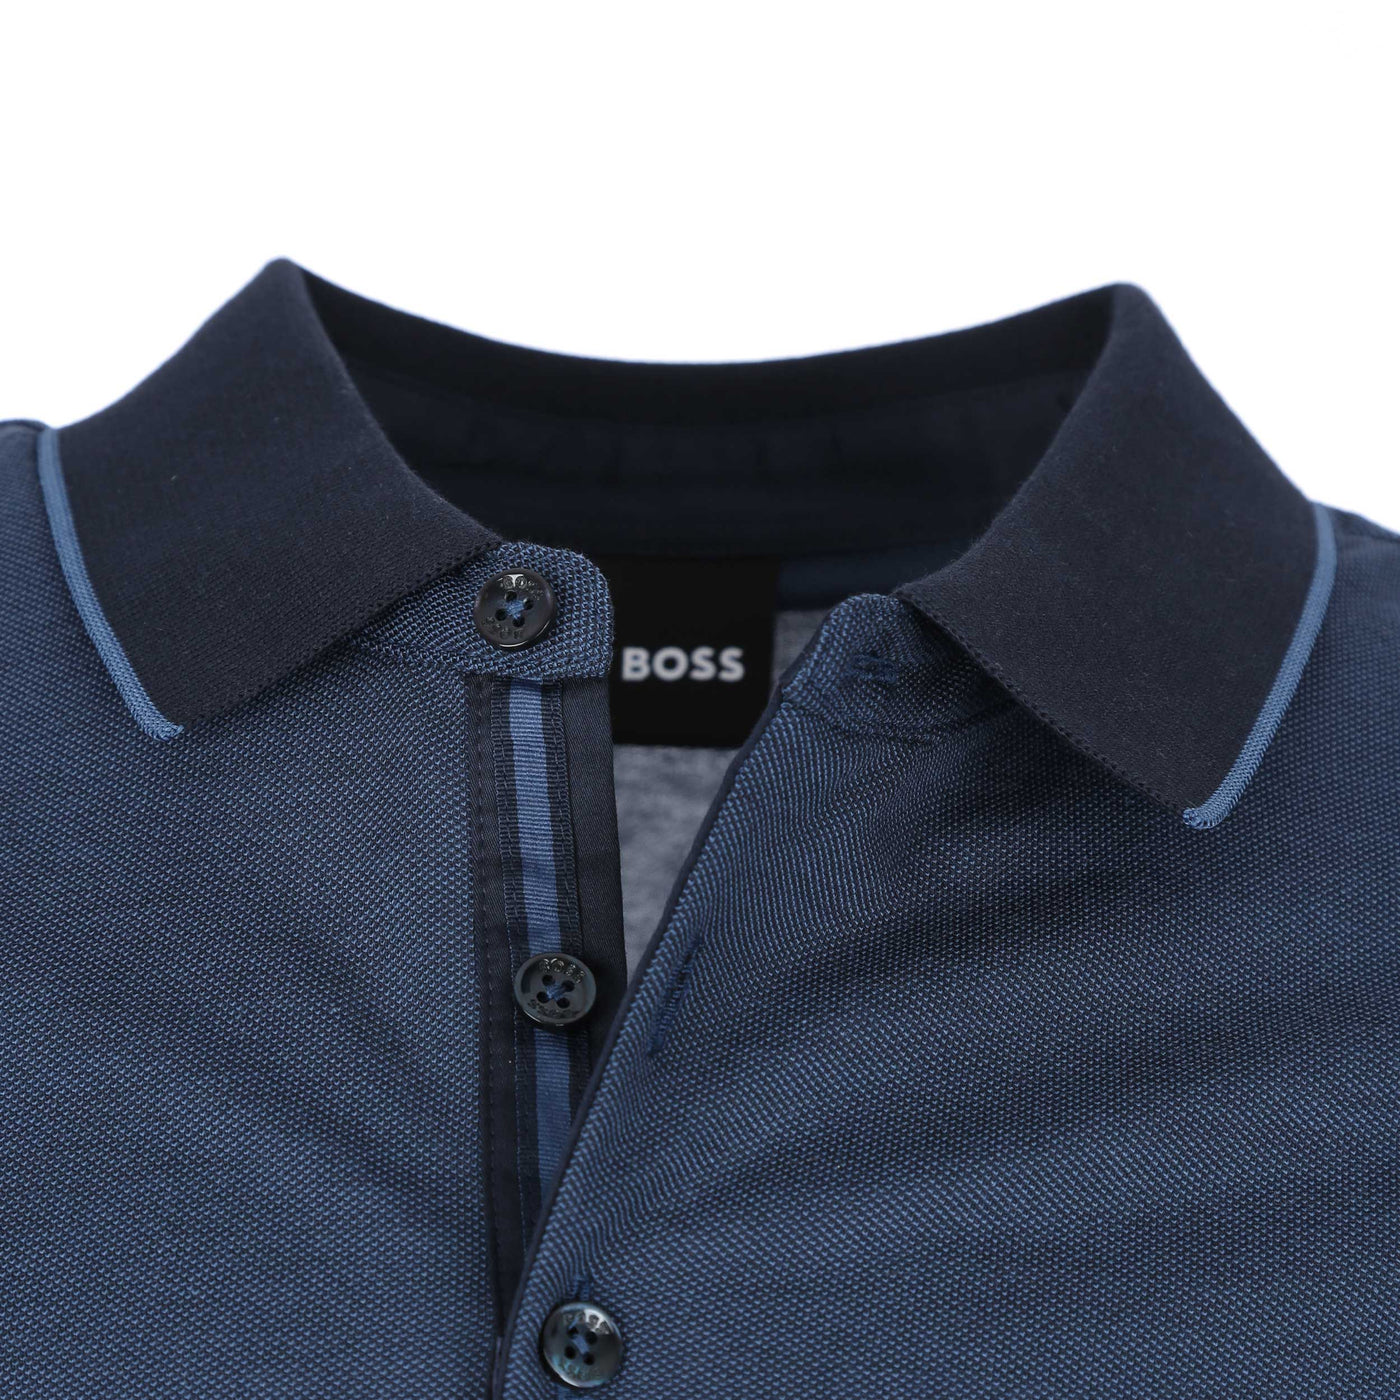 BOSS Prout 28 Polo Shirt in Dark Blue